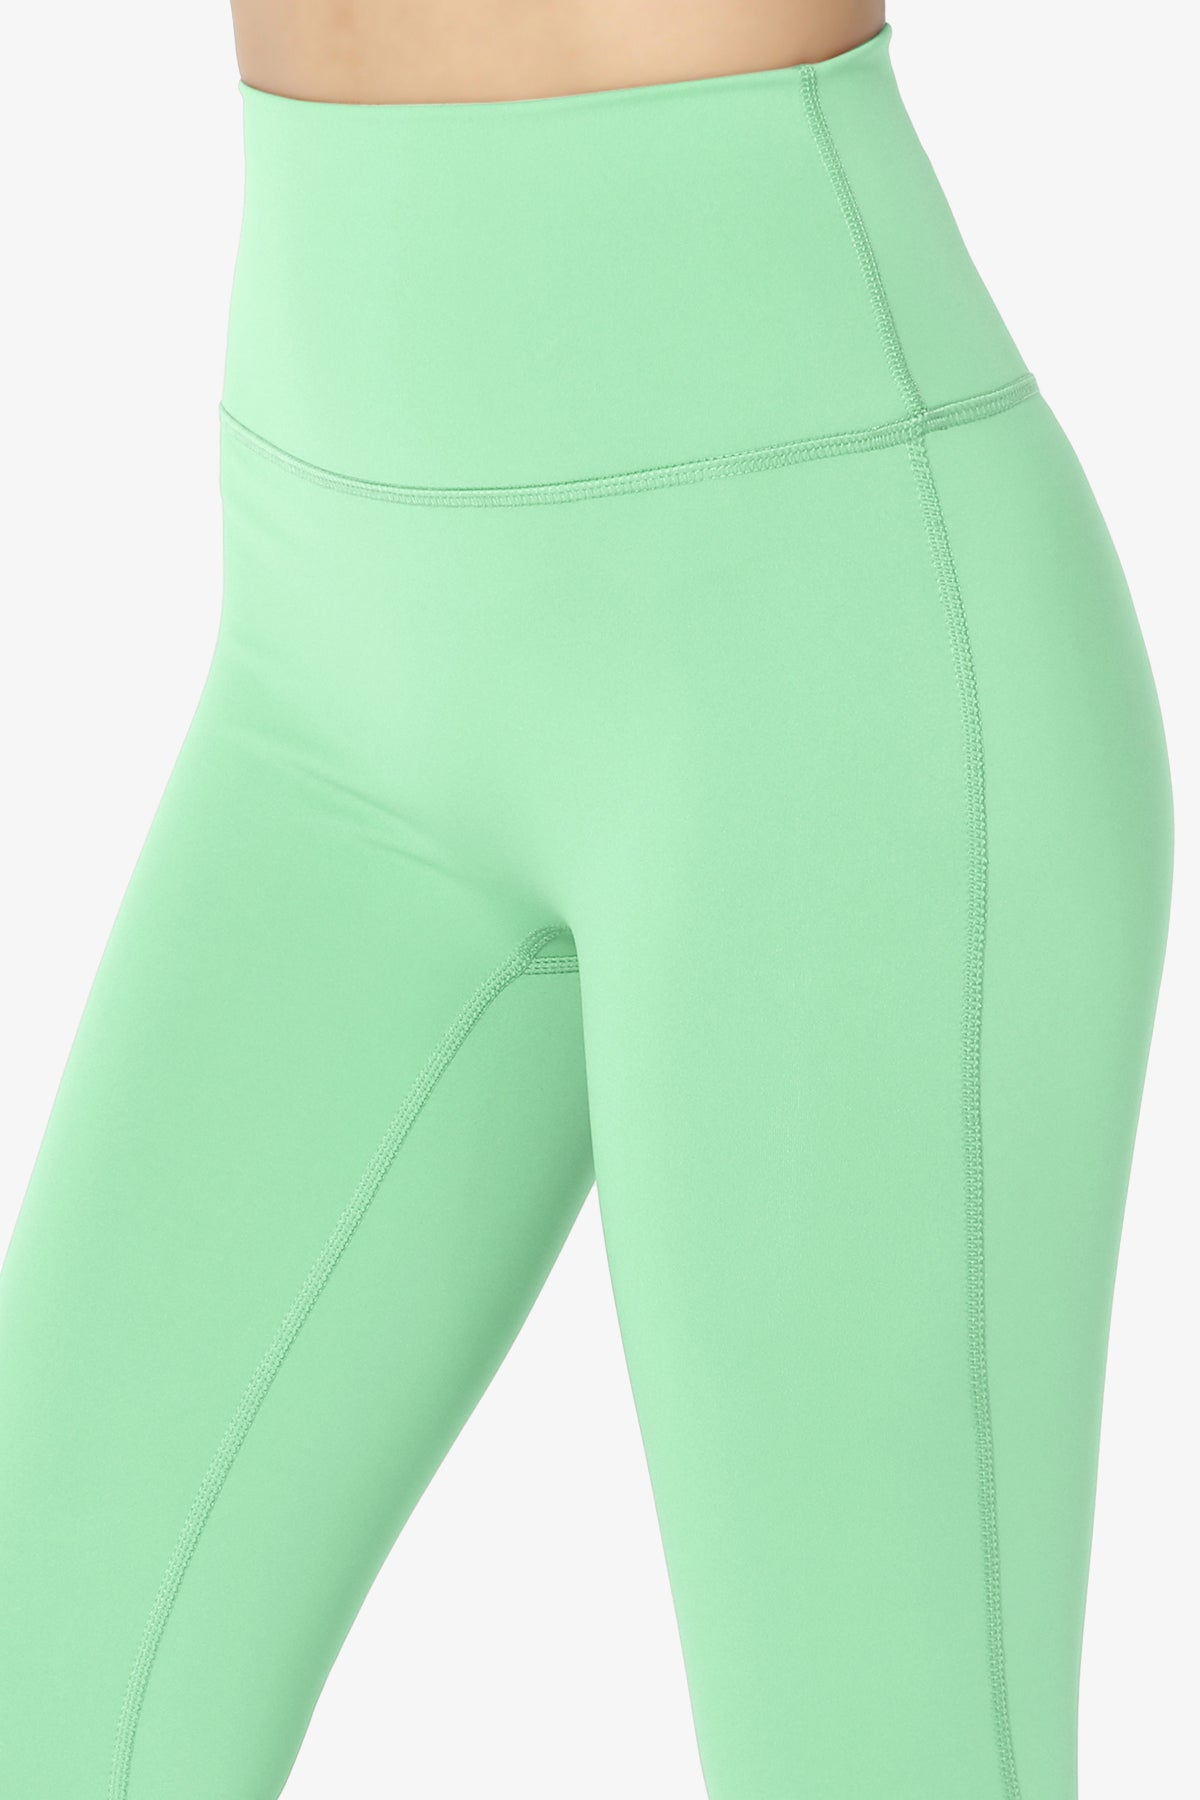 Tempo Glo High Waisted Workout Leggings - Mint / XL  High waisted leggings  workout, Workout, Workout leggings